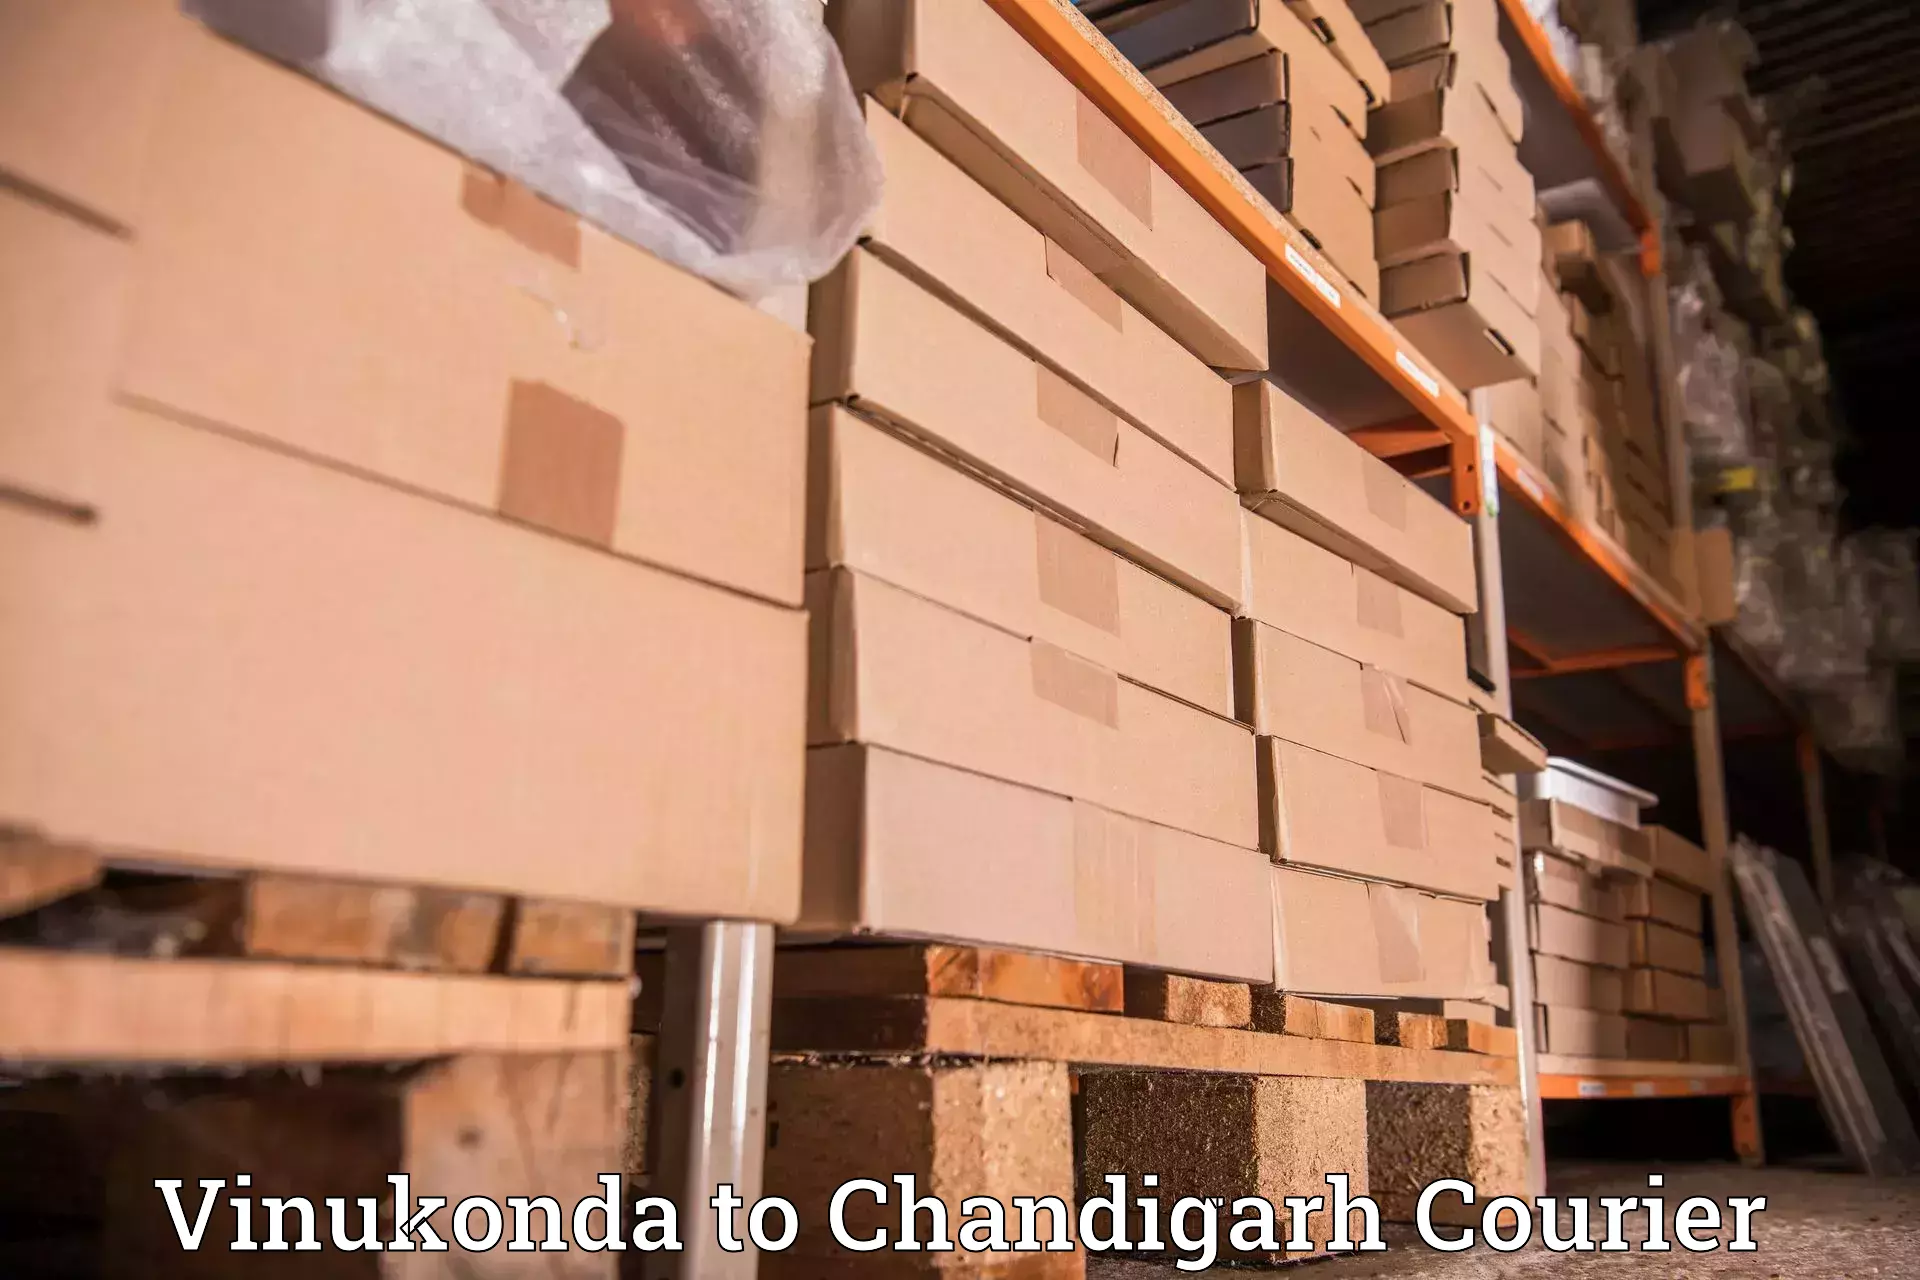 Multi-national courier services Vinukonda to Chandigarh